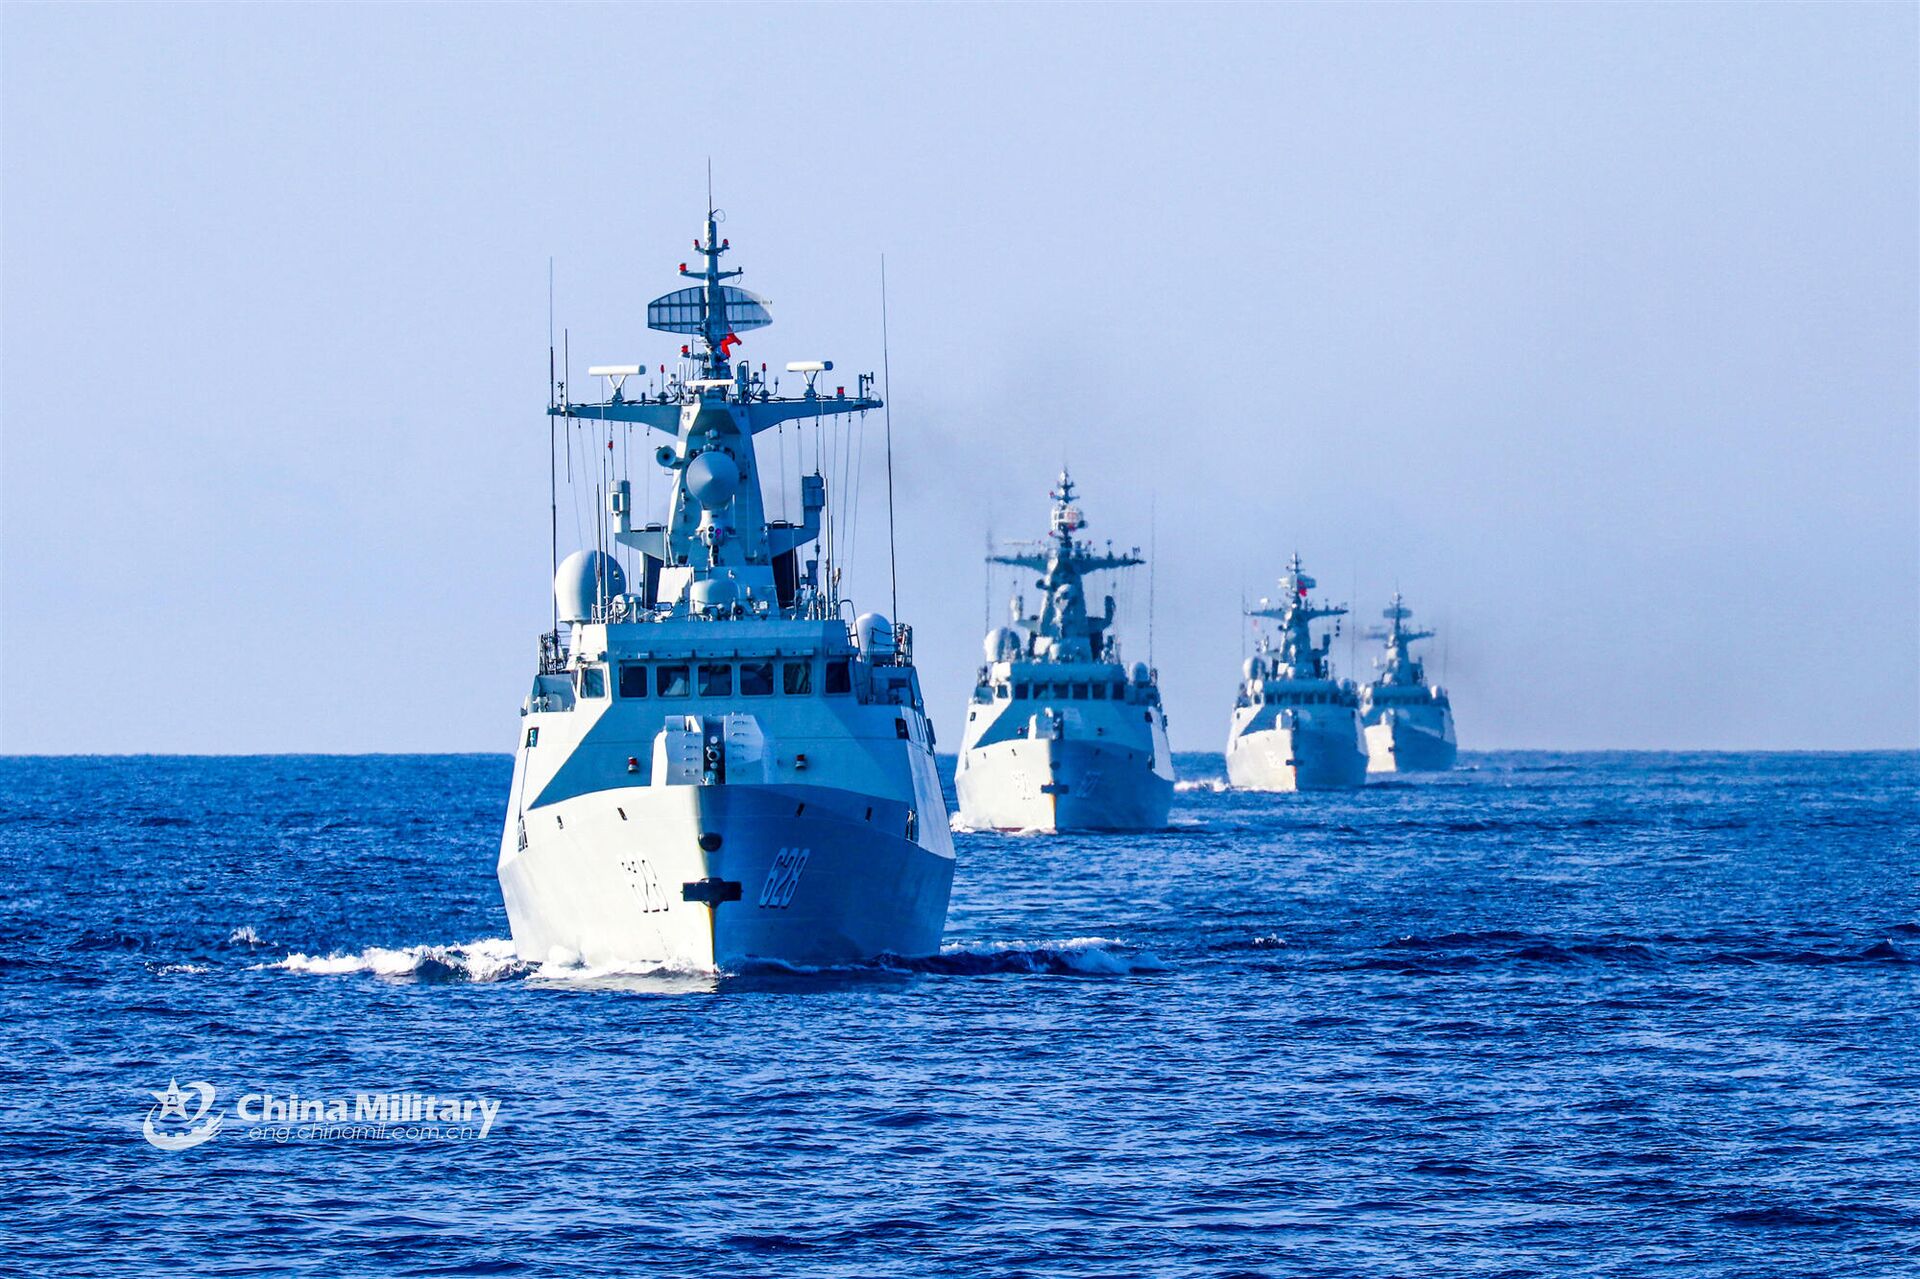 The frigate Enshi (Hull 627), Yongzhou (Hull 628), Bazhong (Hull 625), and Wuzhou (Hull 626) steam in formation during a 9-day maritime training exercise in waters of the South China Sea in late November, 2020. They are attached to a frigate flotilla of the navy under the PLA Southern Theater Command. - Sputnik International, 1920, 28.02.2022